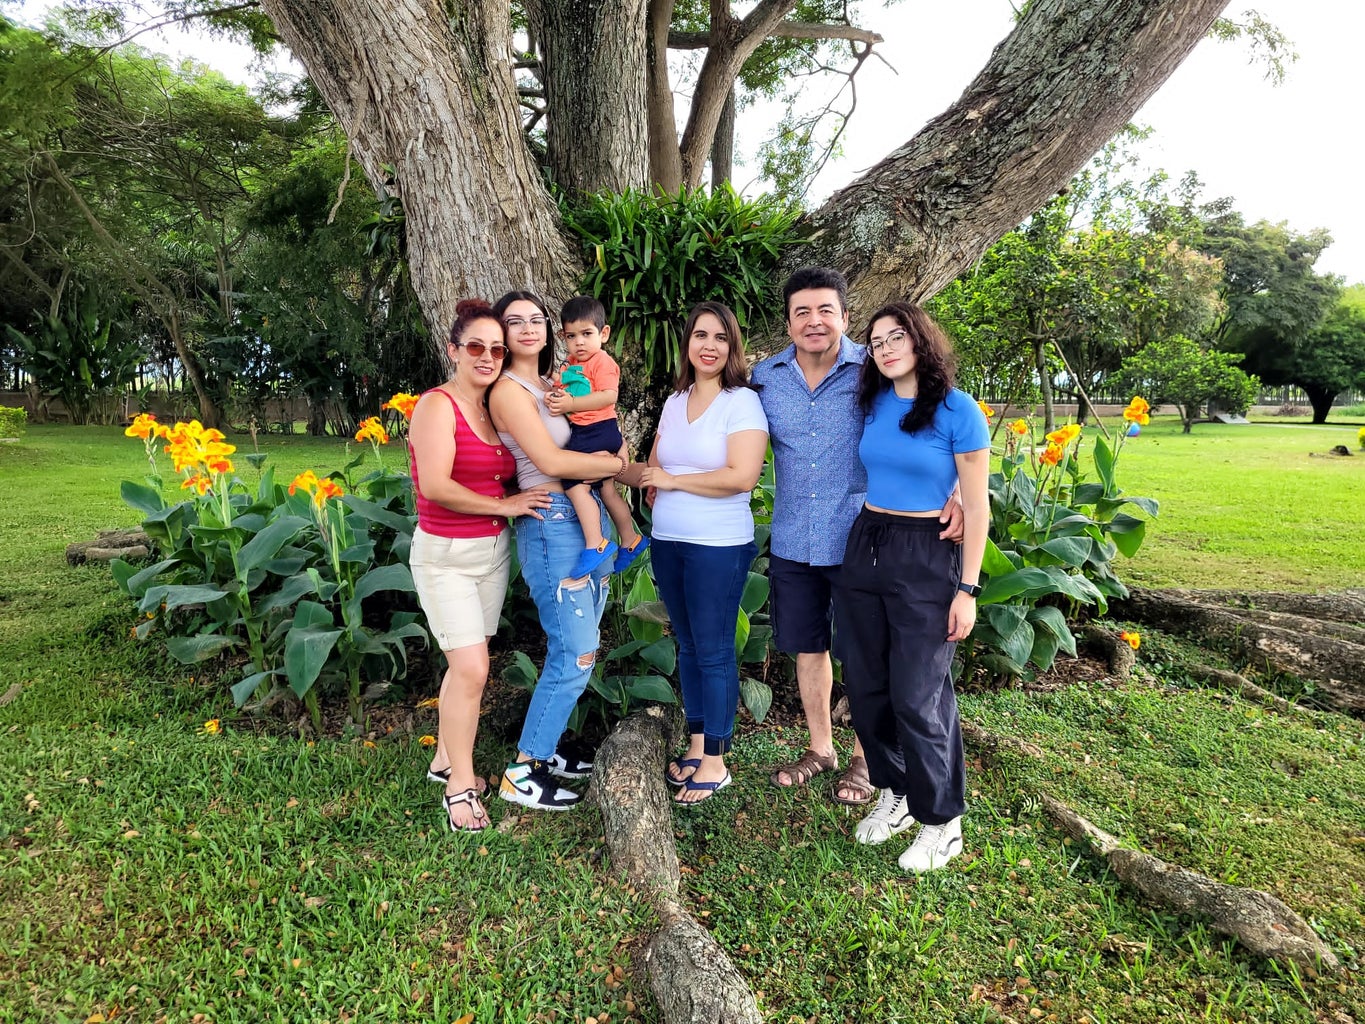 cynthia jimenez (the author) and family in colombia